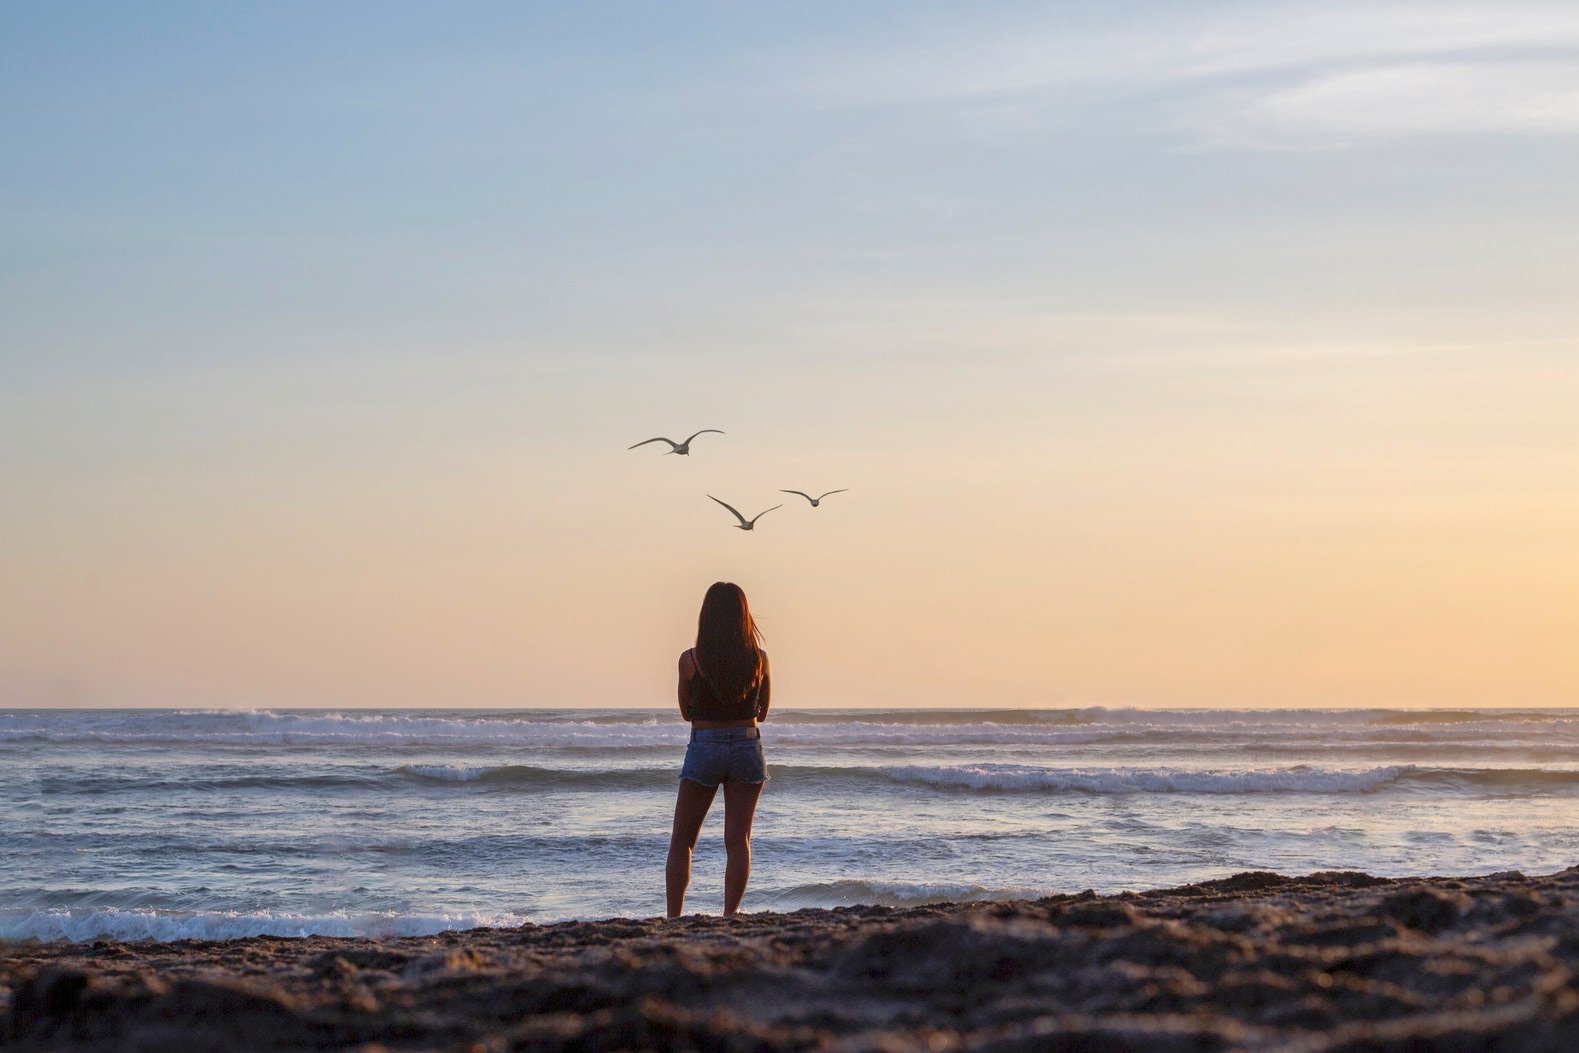 Positive effects of mindfulness - Woman standing on beach looking out over sea with seagulls above